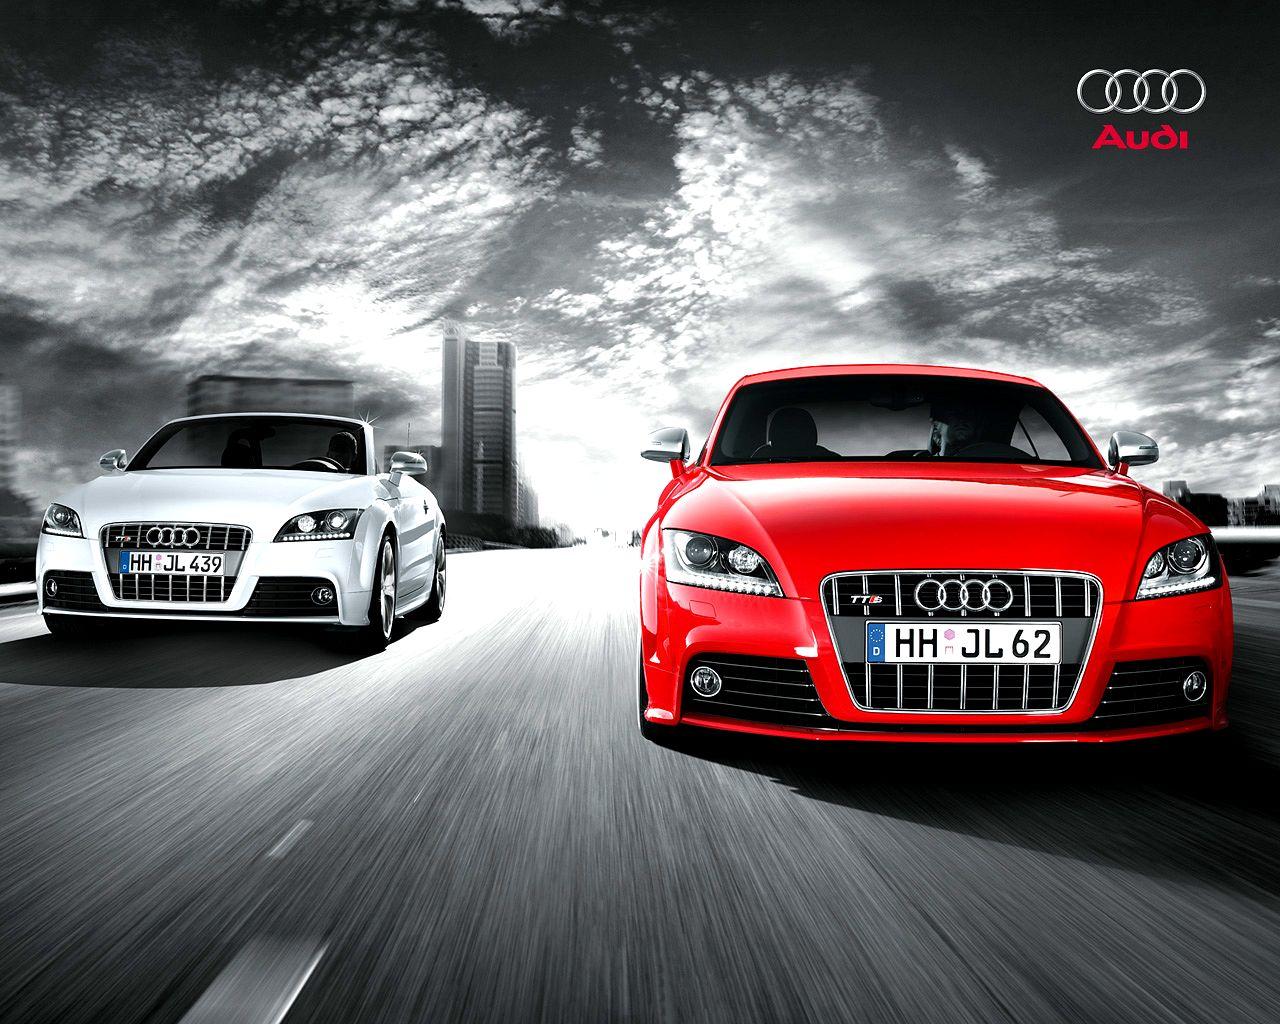 Audi tablet, laptop wallpapers hd, desktop backgrounds 1366x768, images and  pictures